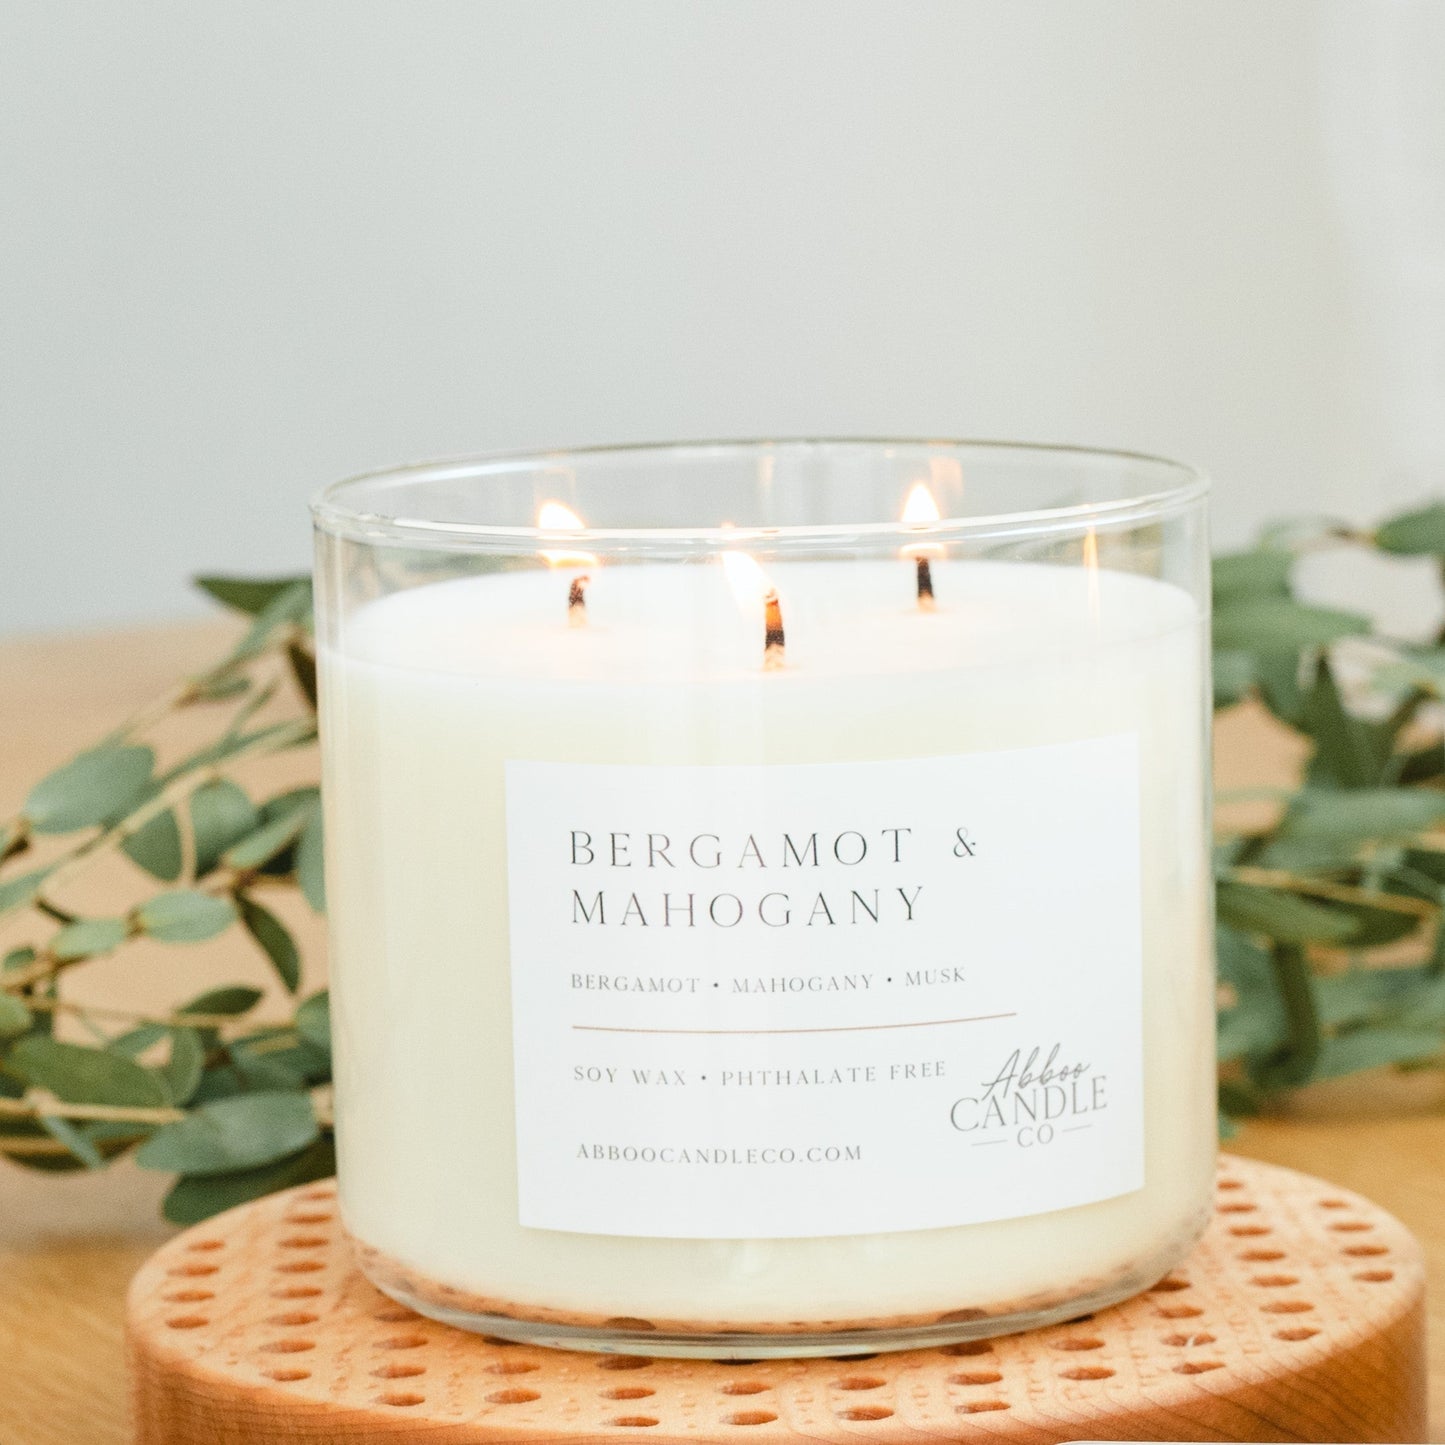 Bergamot and Mahogany 3-Wick Soy Candle - Abboo Candle Co® Wholesale